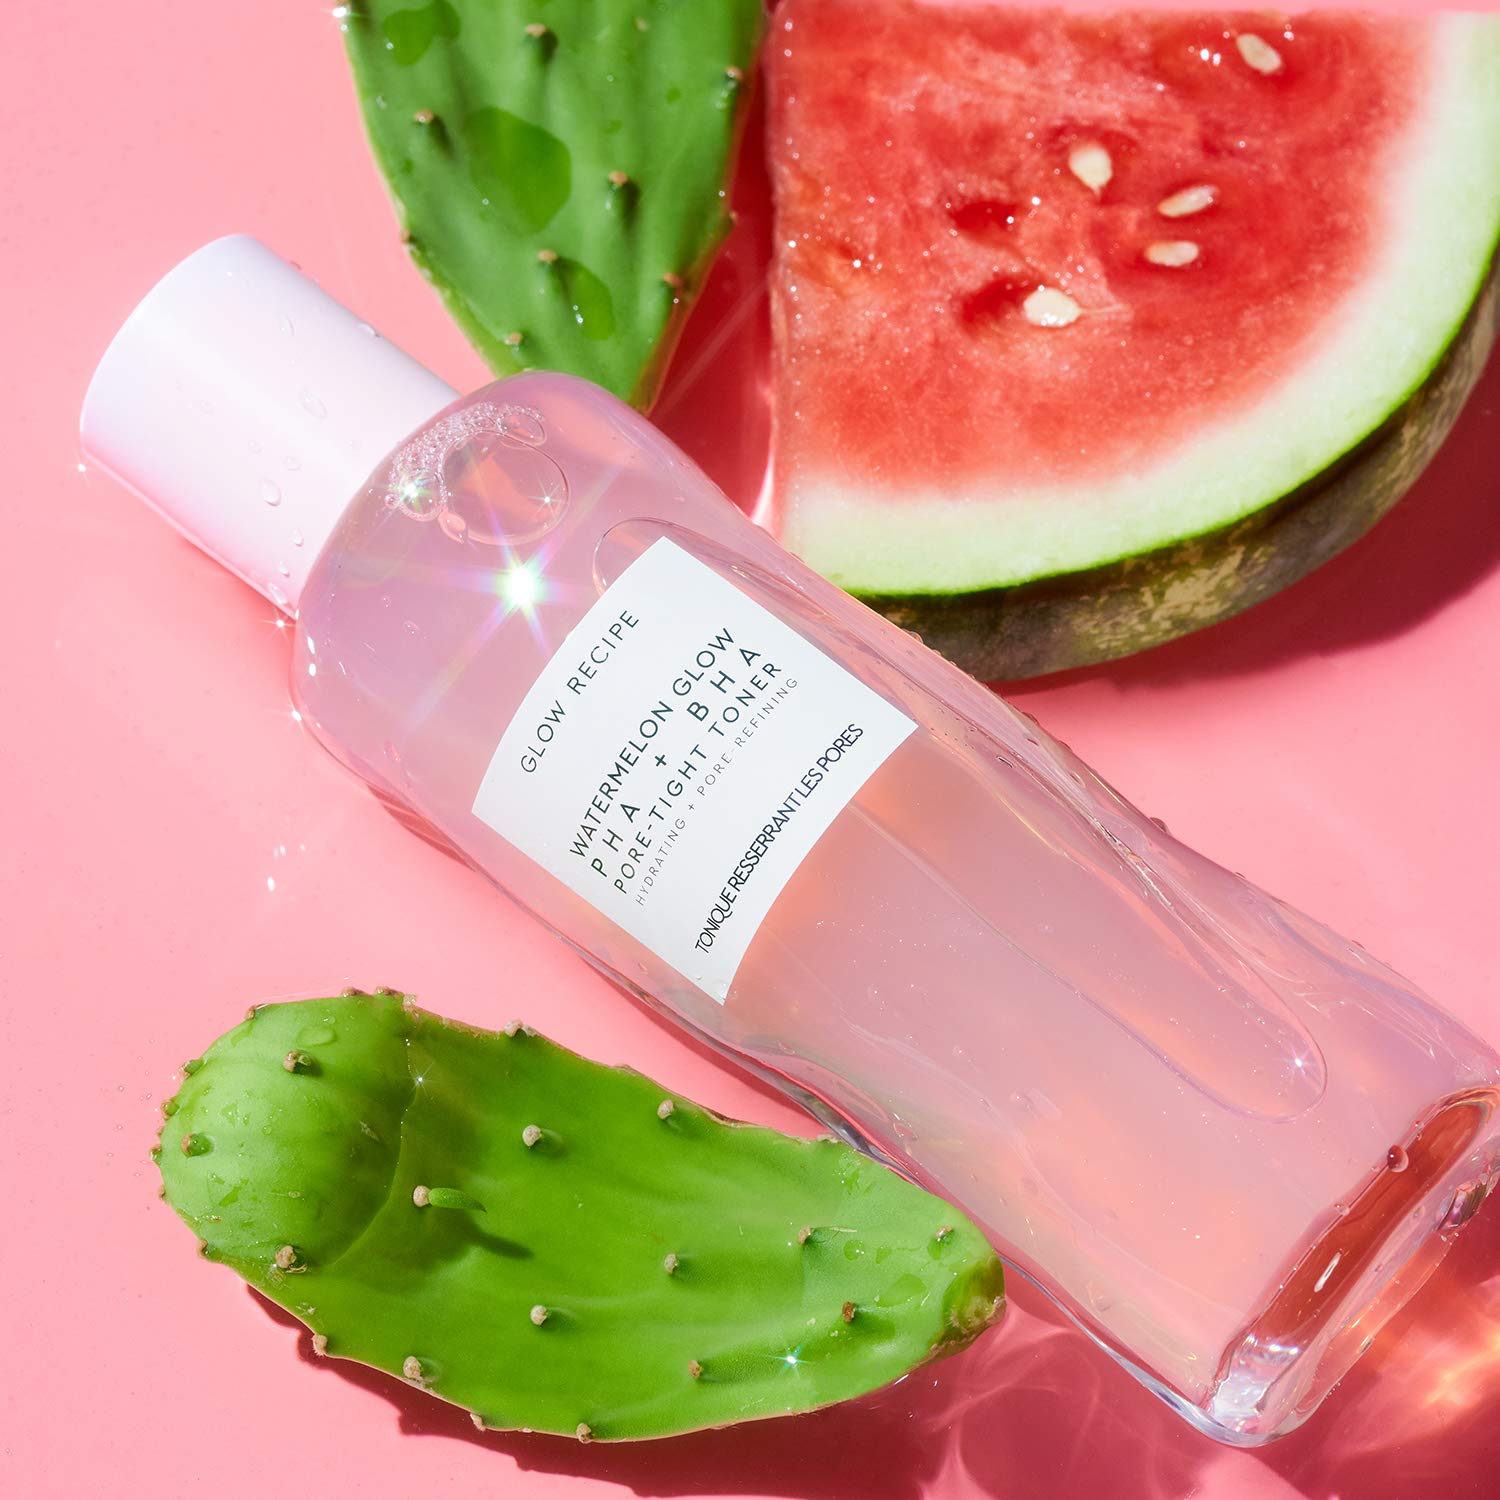 Glow Recipe Watermelon Glow PHA + BHA Pore-Tight Face Toner - PHA Hydrating Toner & BHA Exfoliant with Cactus Water, Cucumber, Tea Tree & Hyaluronic Acid for a Smooth Glow (150ml)